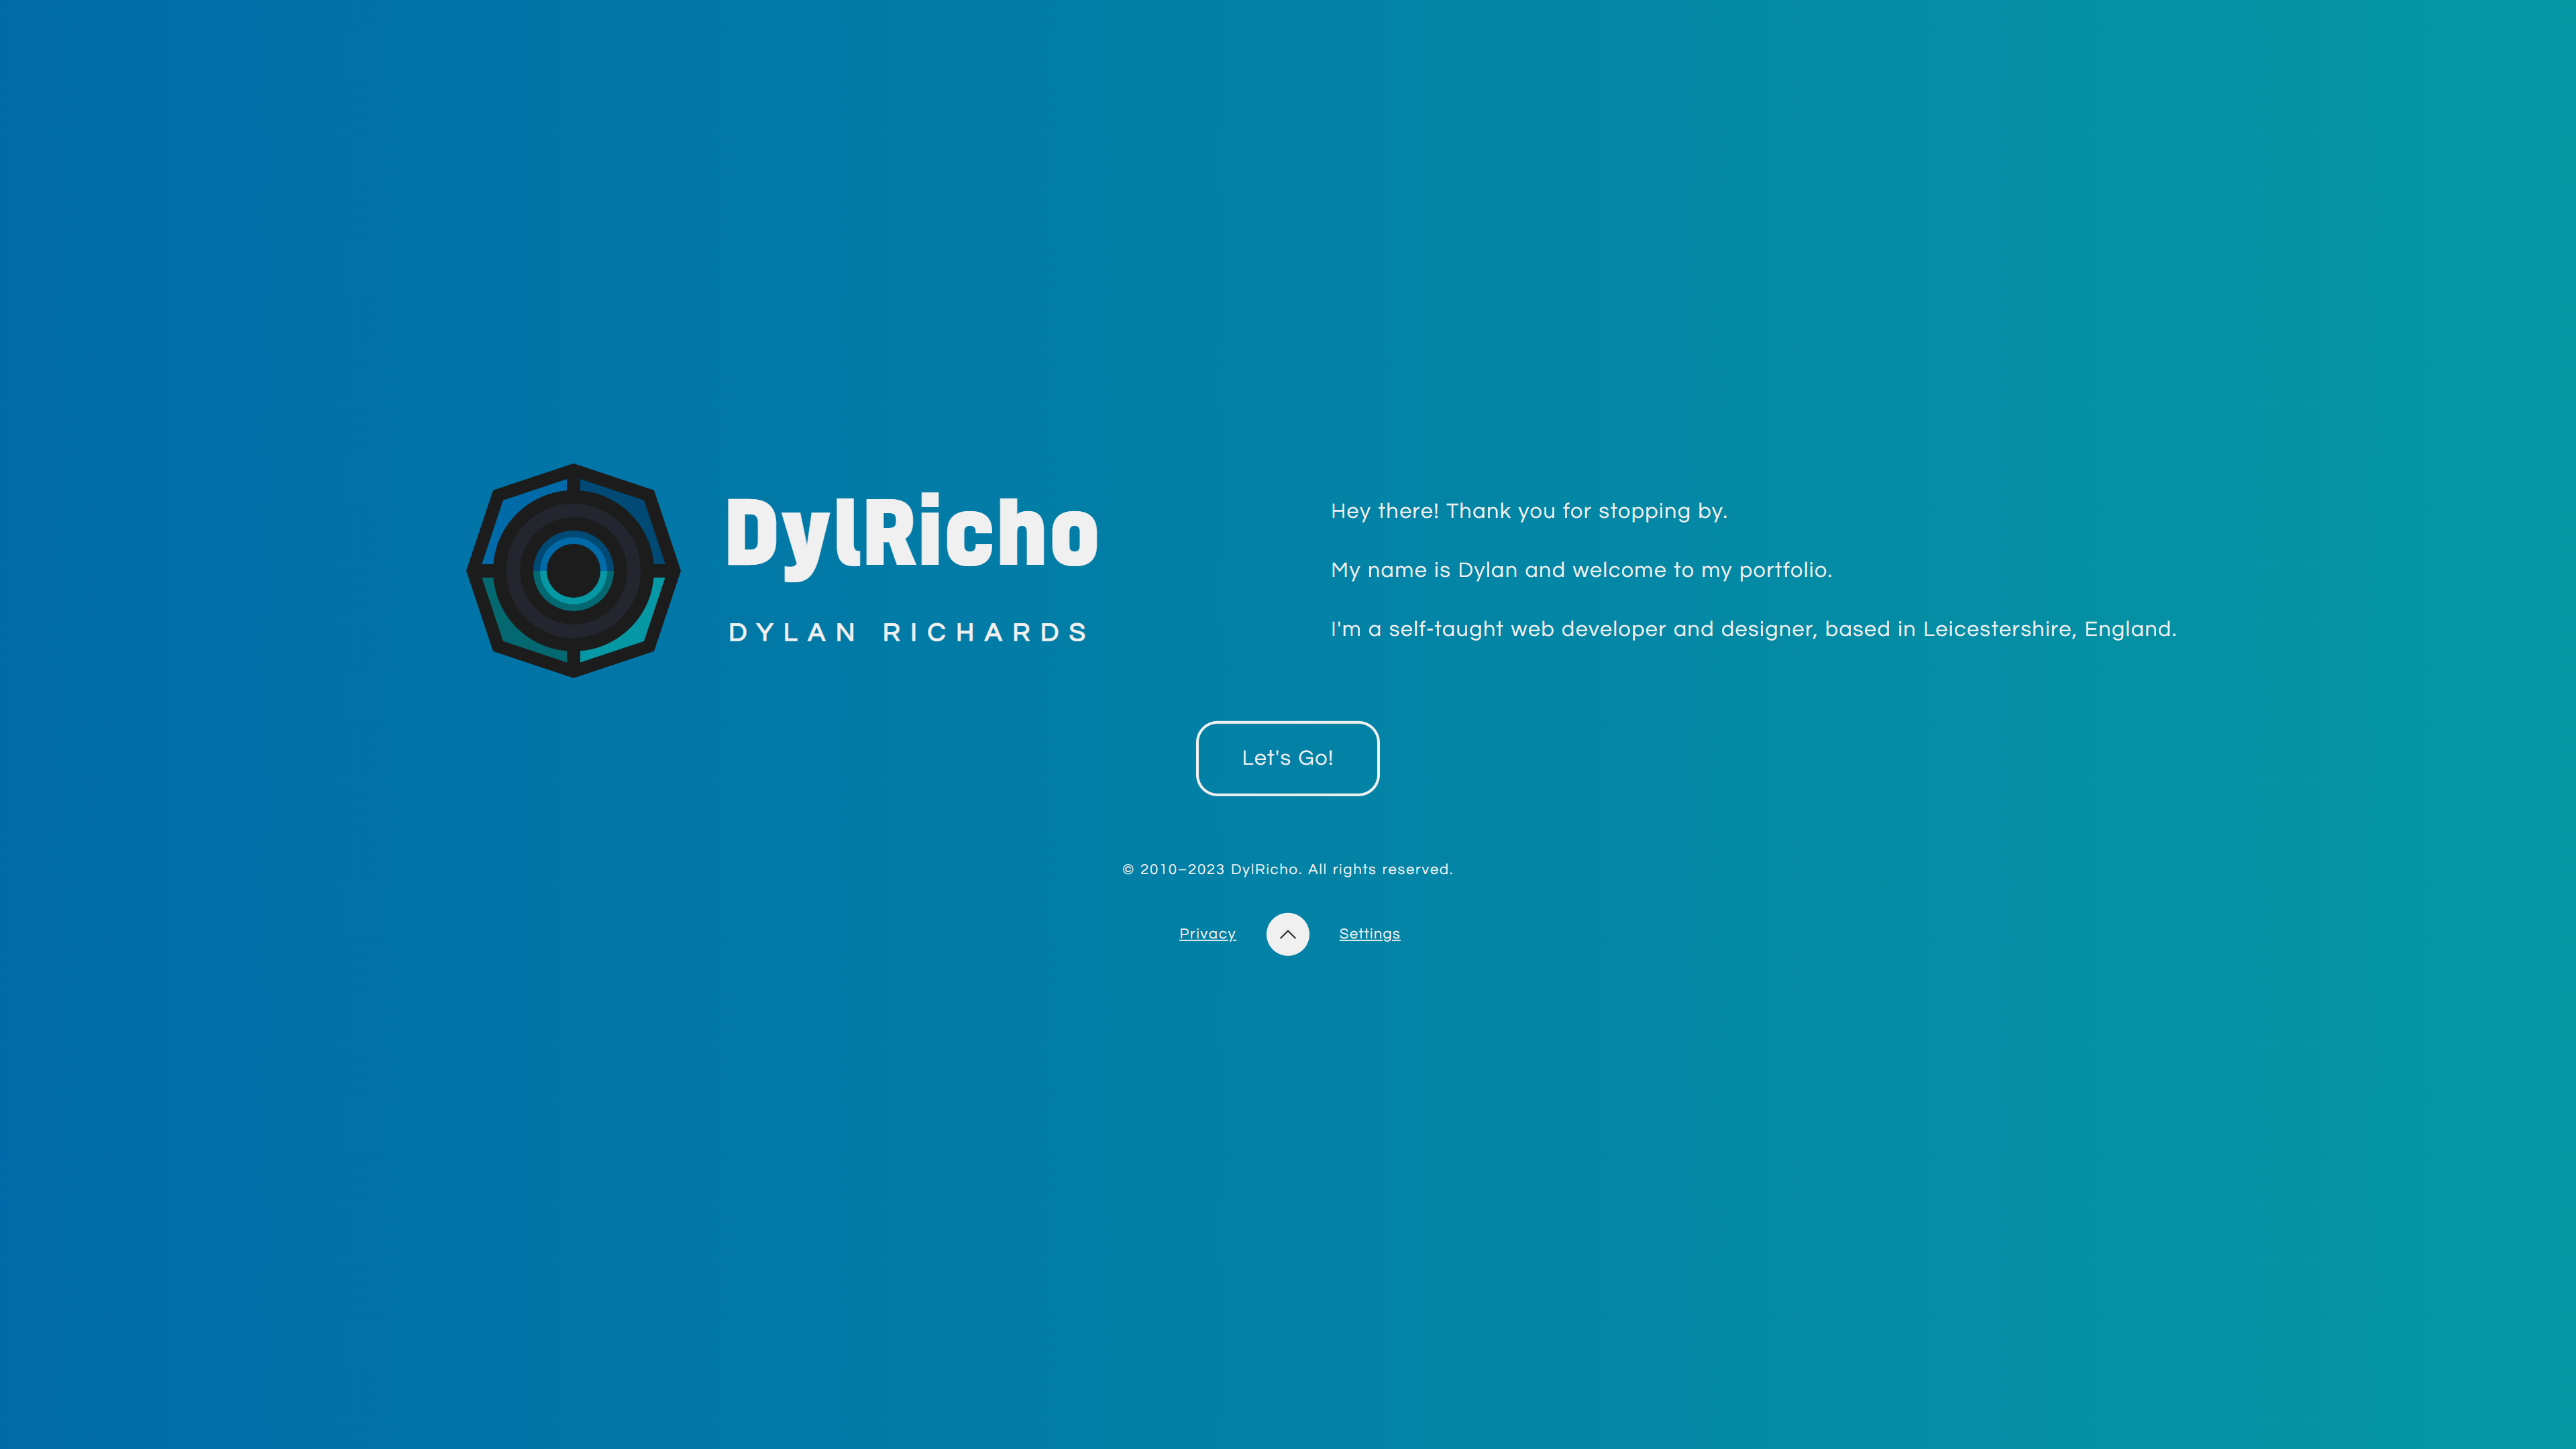 A screenshot of the latest version of DylRicho: Dylan Richards